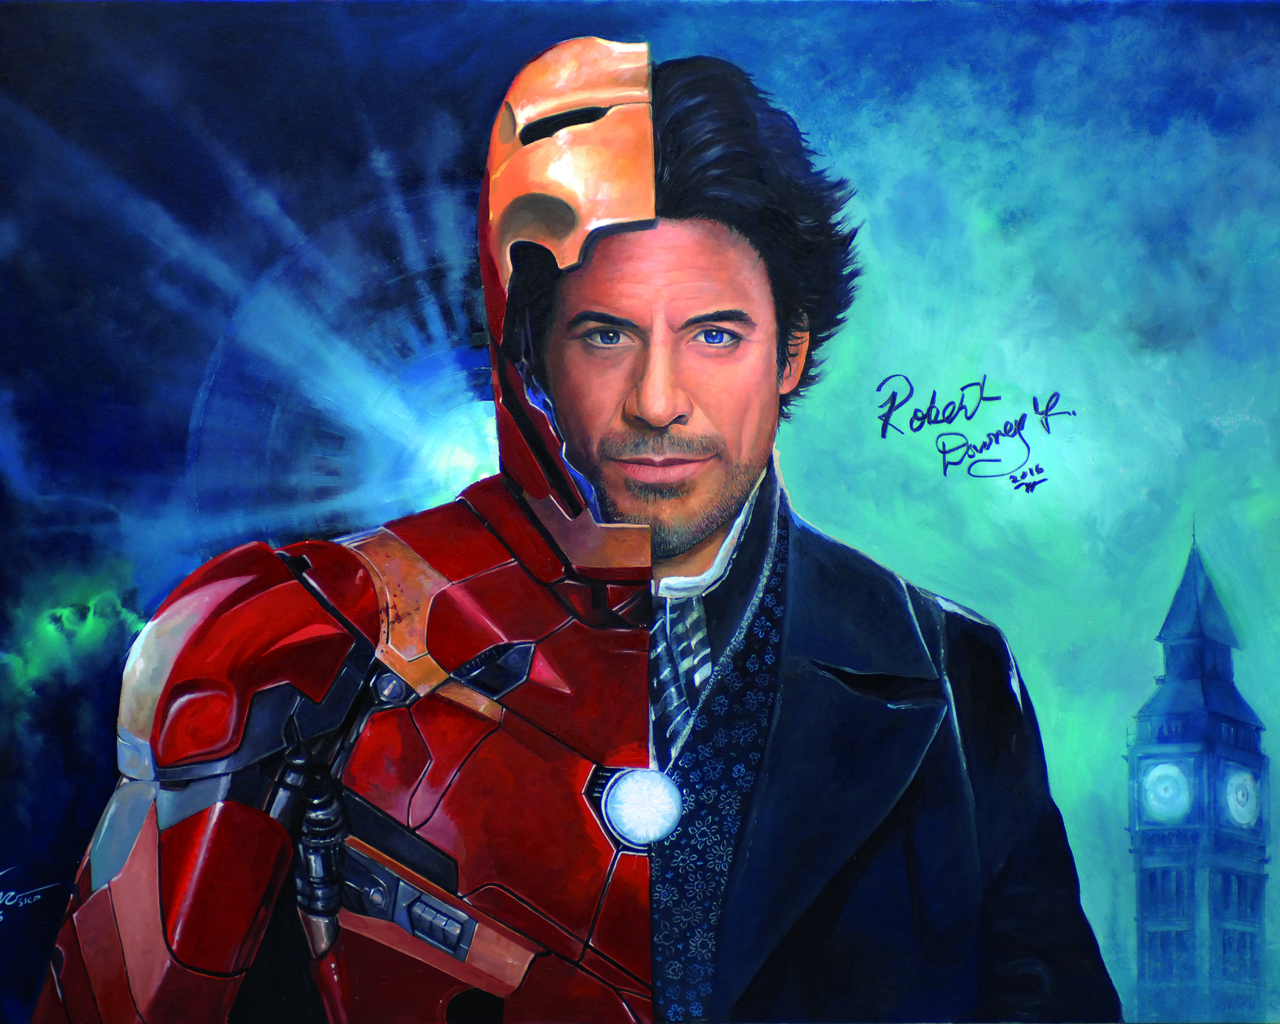 Robert Downery JR As Holmes And Iron Man Portrait 1280x1024 Resolution HD 4k Wallpaper, Image, Background, Photo and Picture